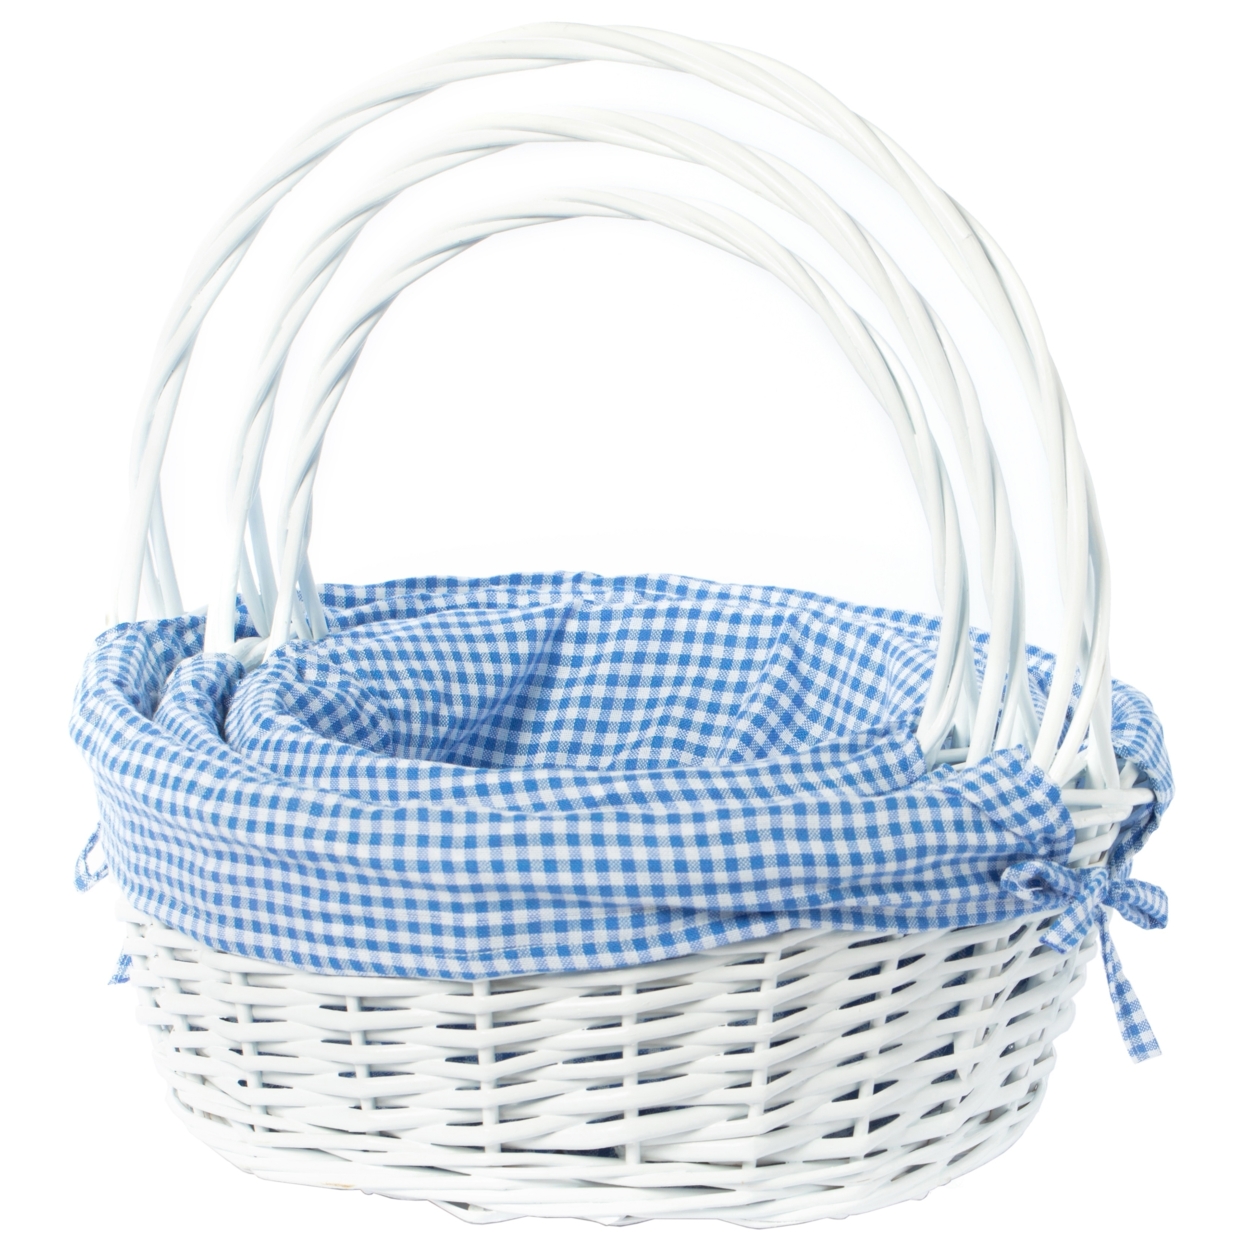 White Round Willow Gift Basket, With Blue And White Gingham Liner And Handles - Pink Medium